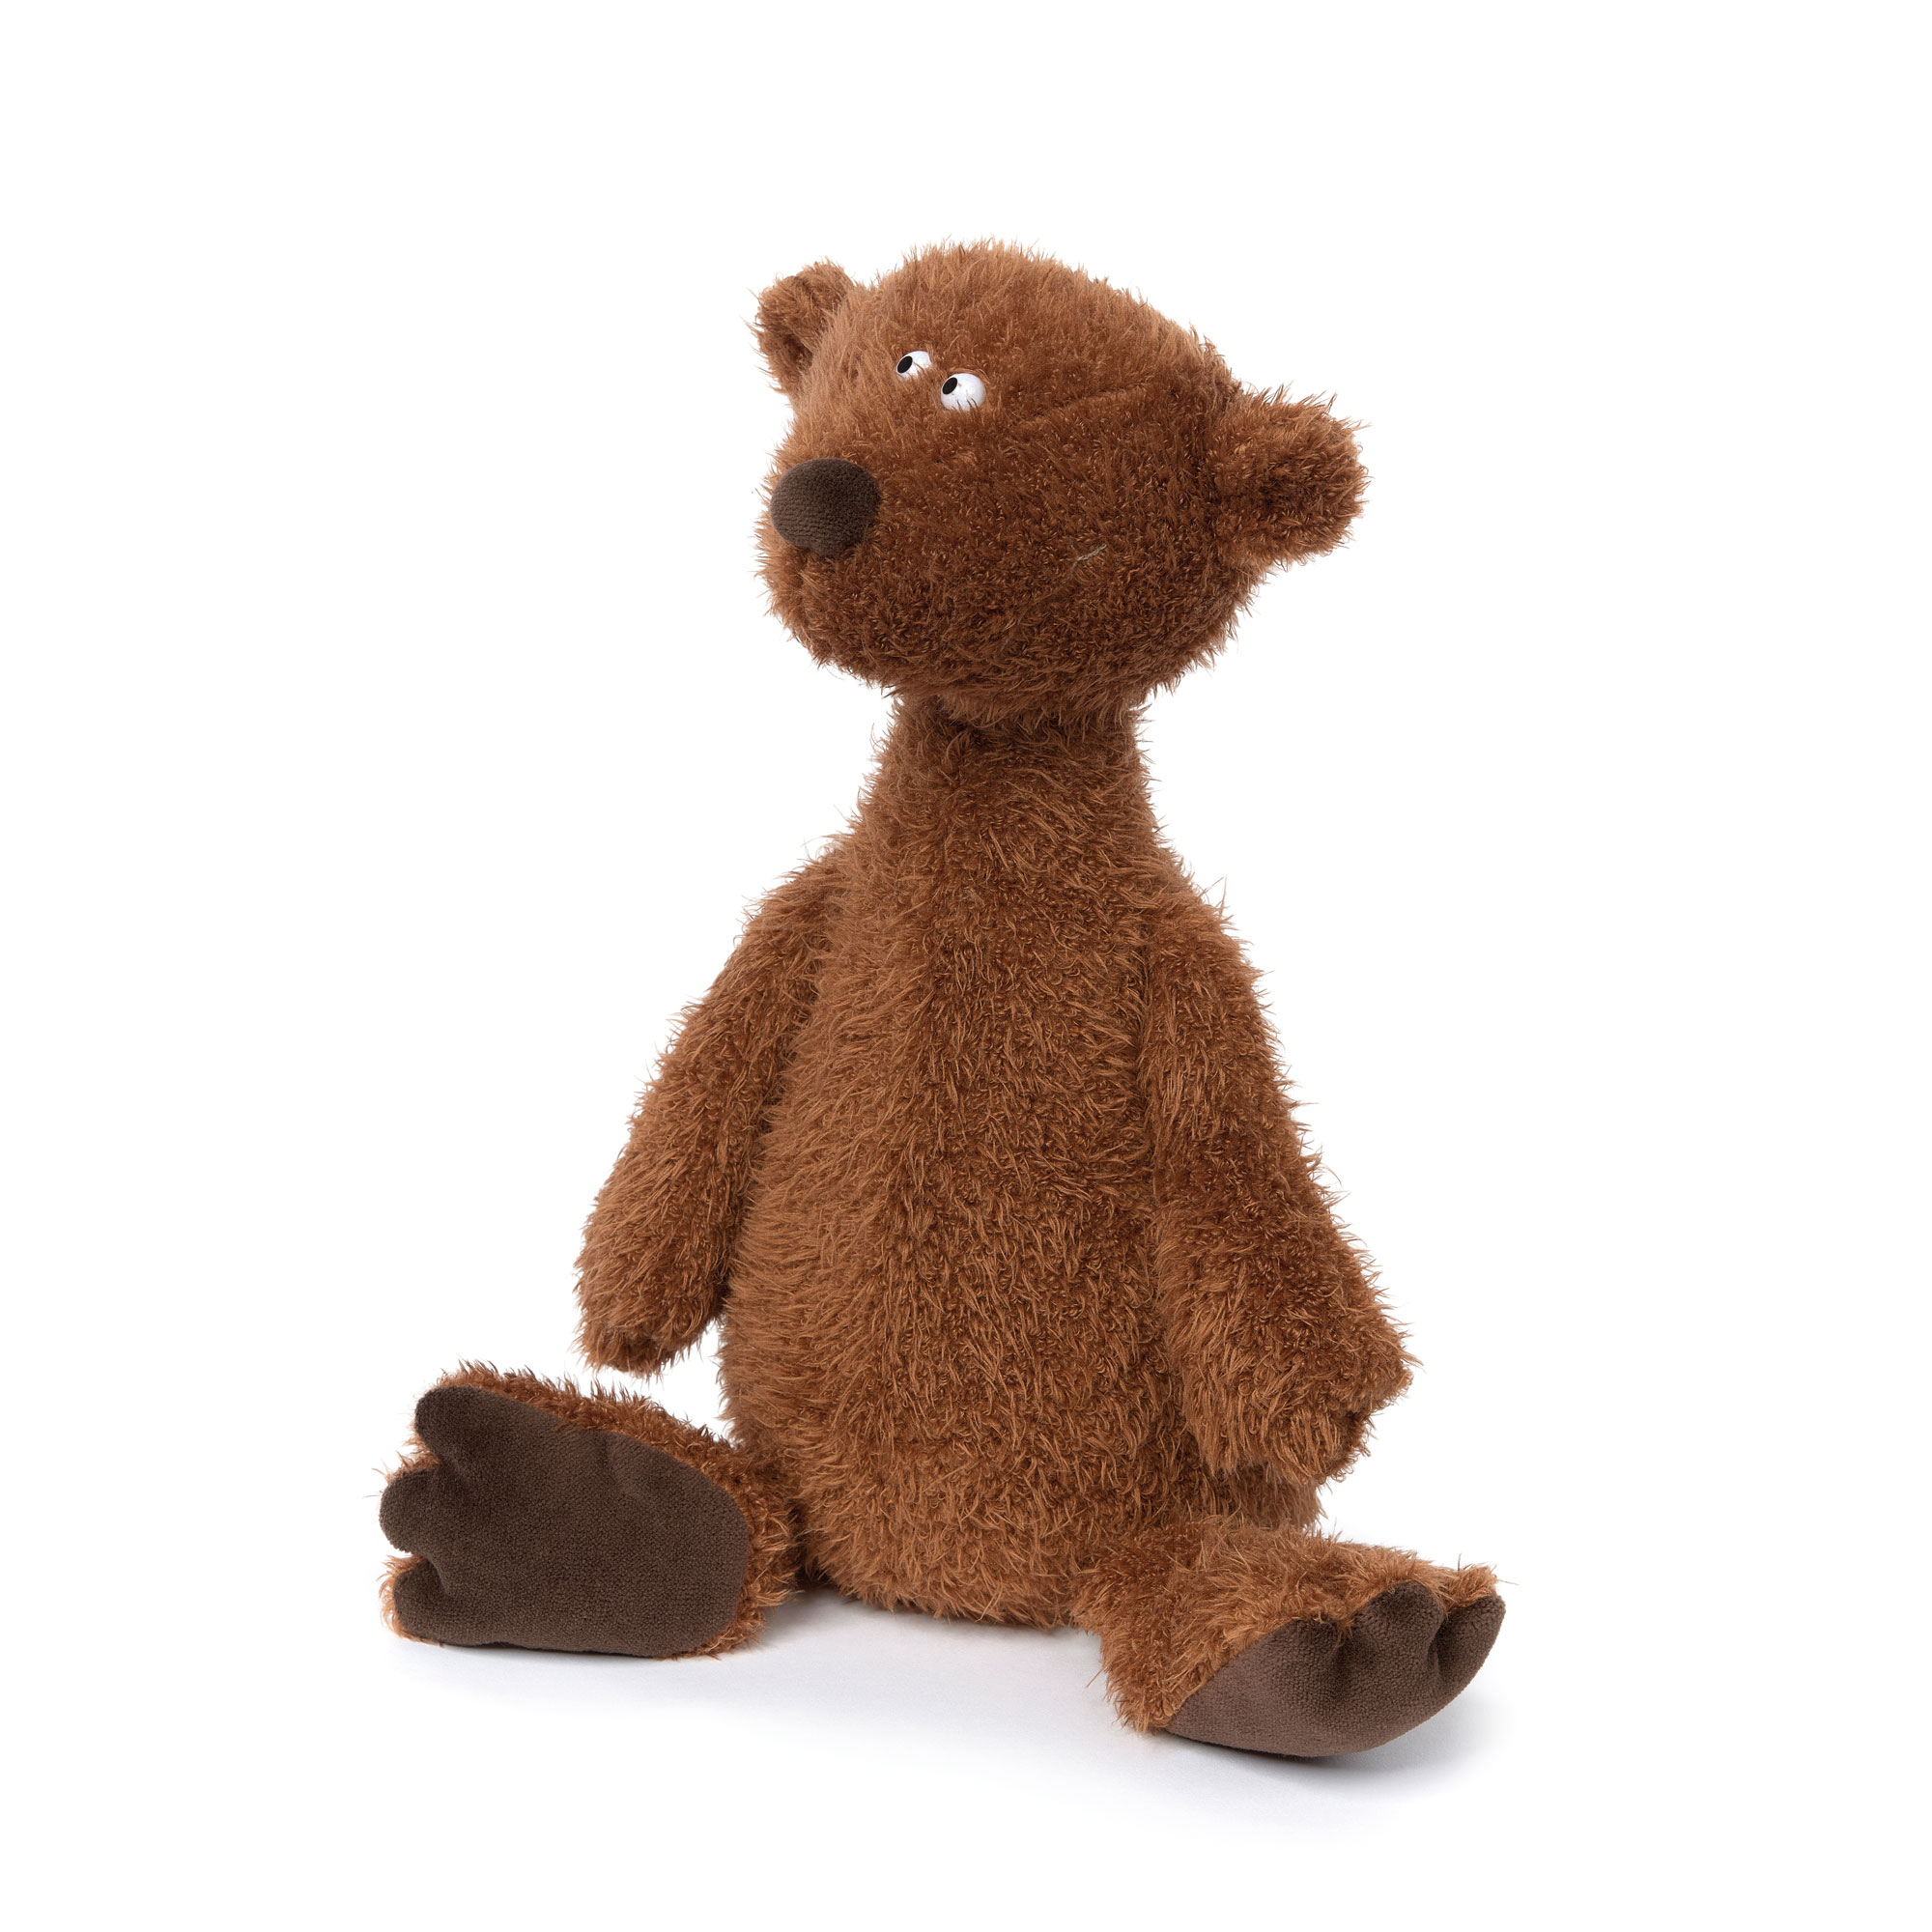 Plush toy bear red brown, Ach Good! Beasts